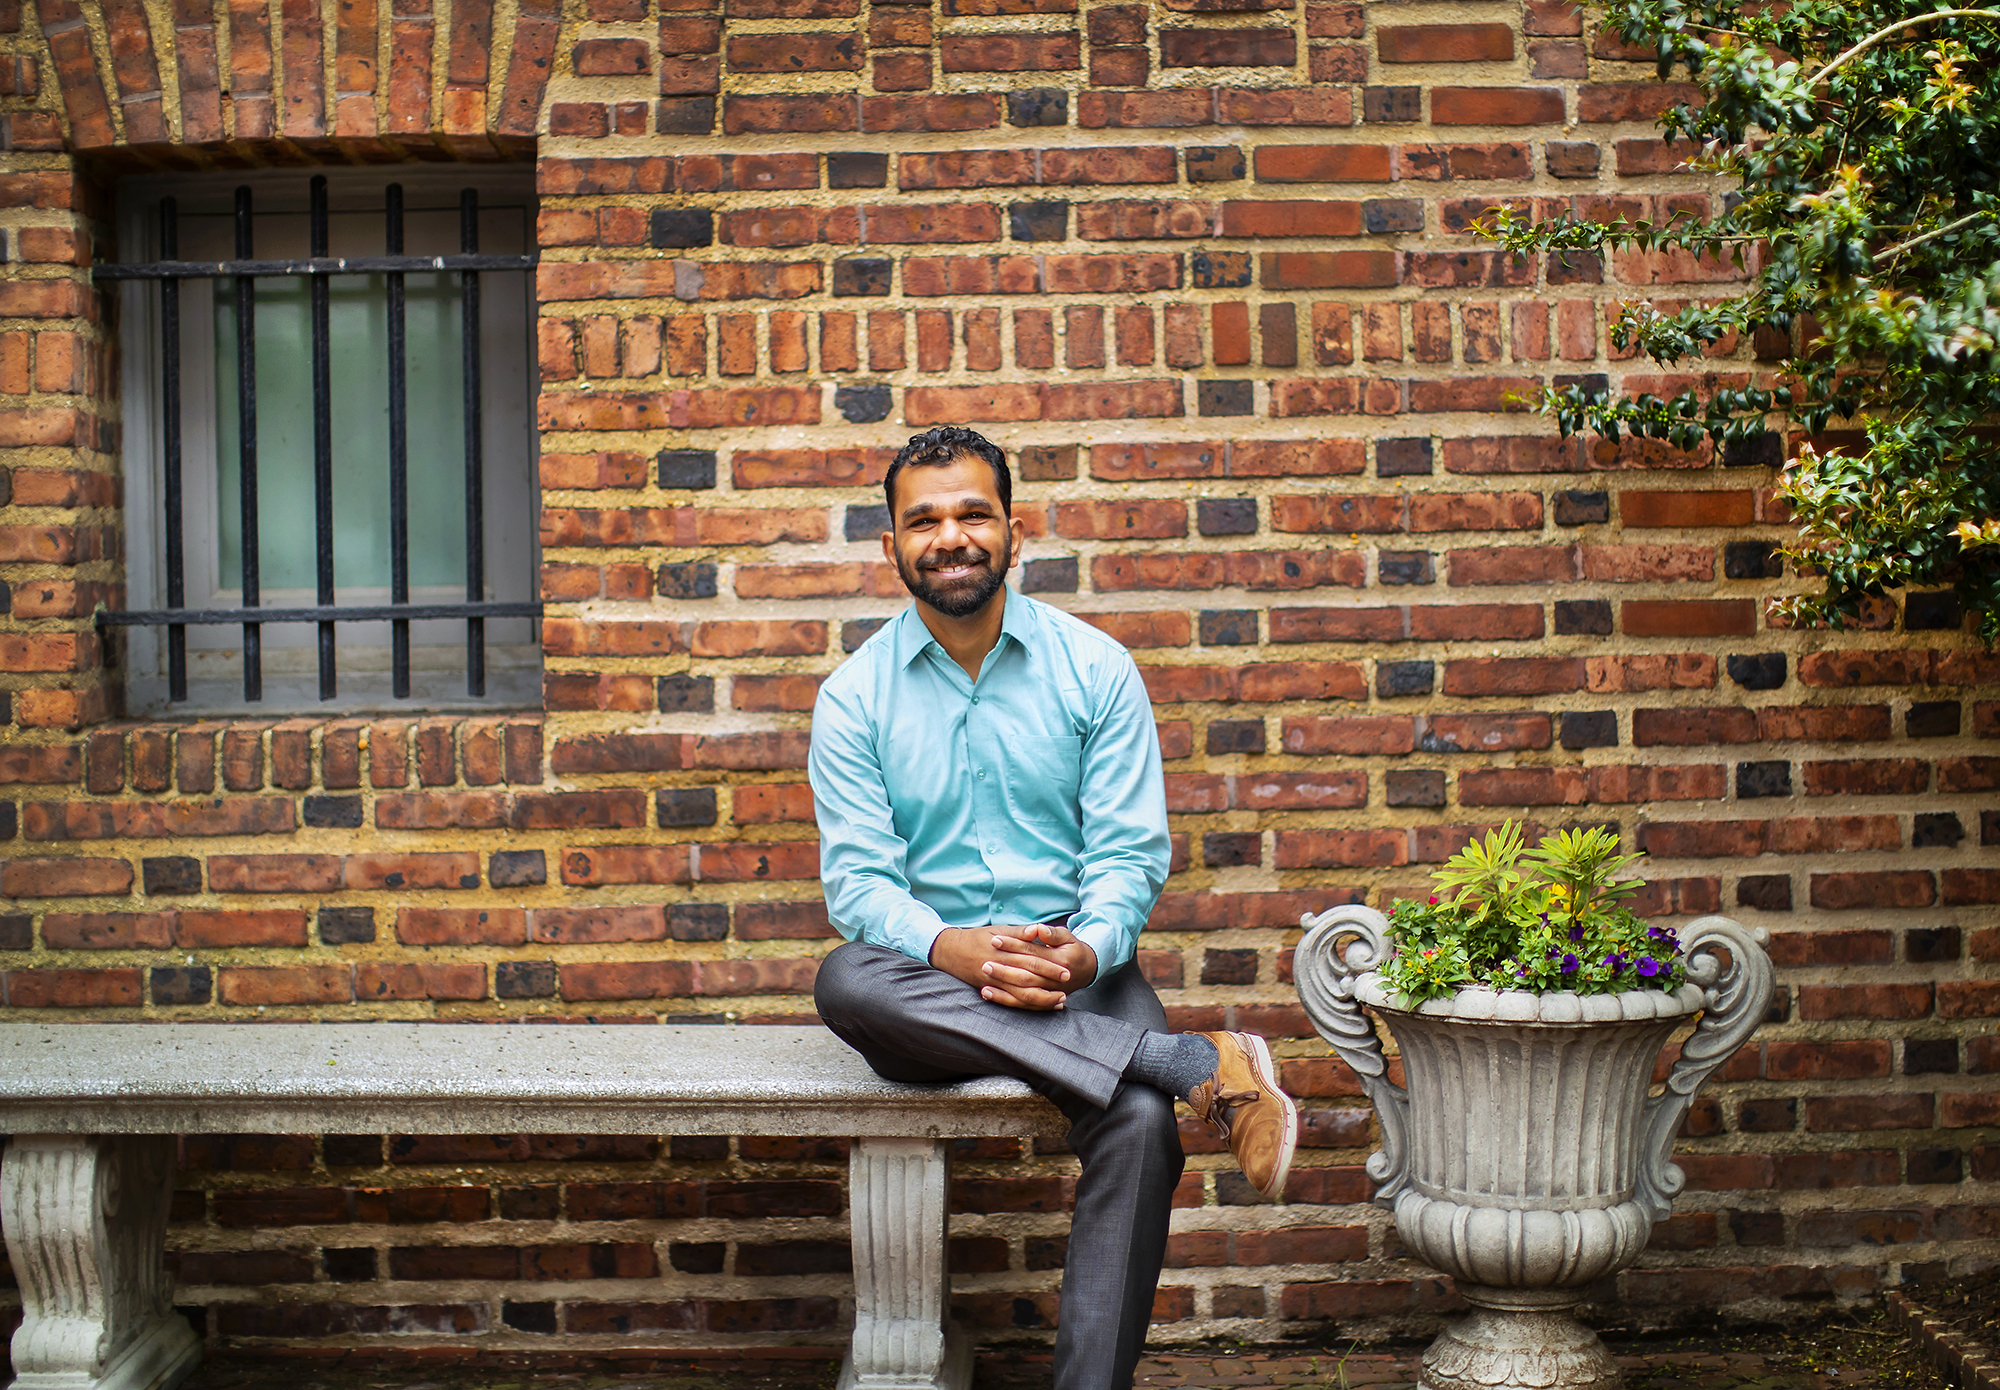 A person in a blue shirt and gray pants sitting on a stone bench in front of a brick building.